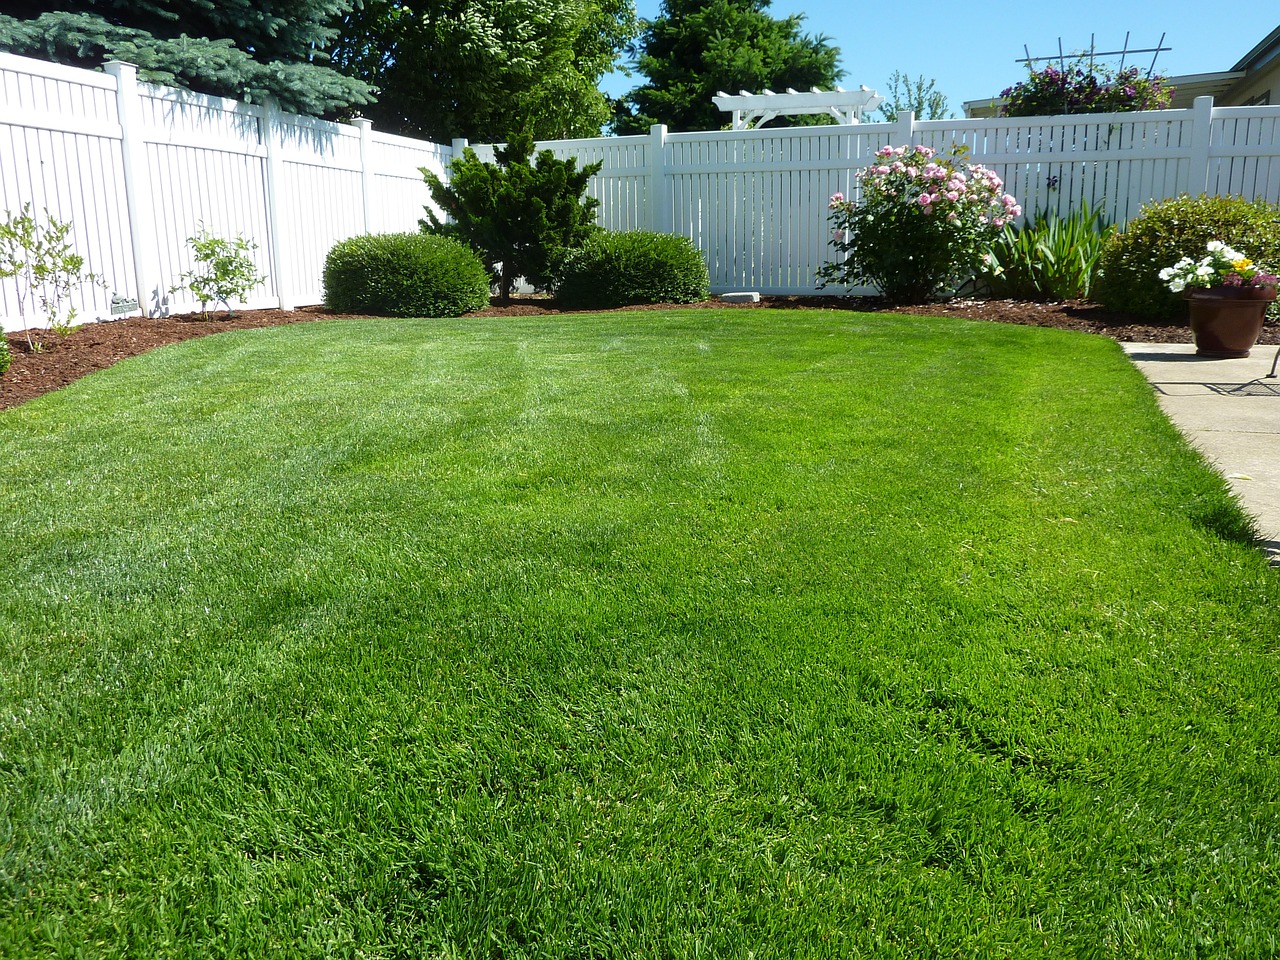 Lawn Mowing Services in Raleigh, N.C.